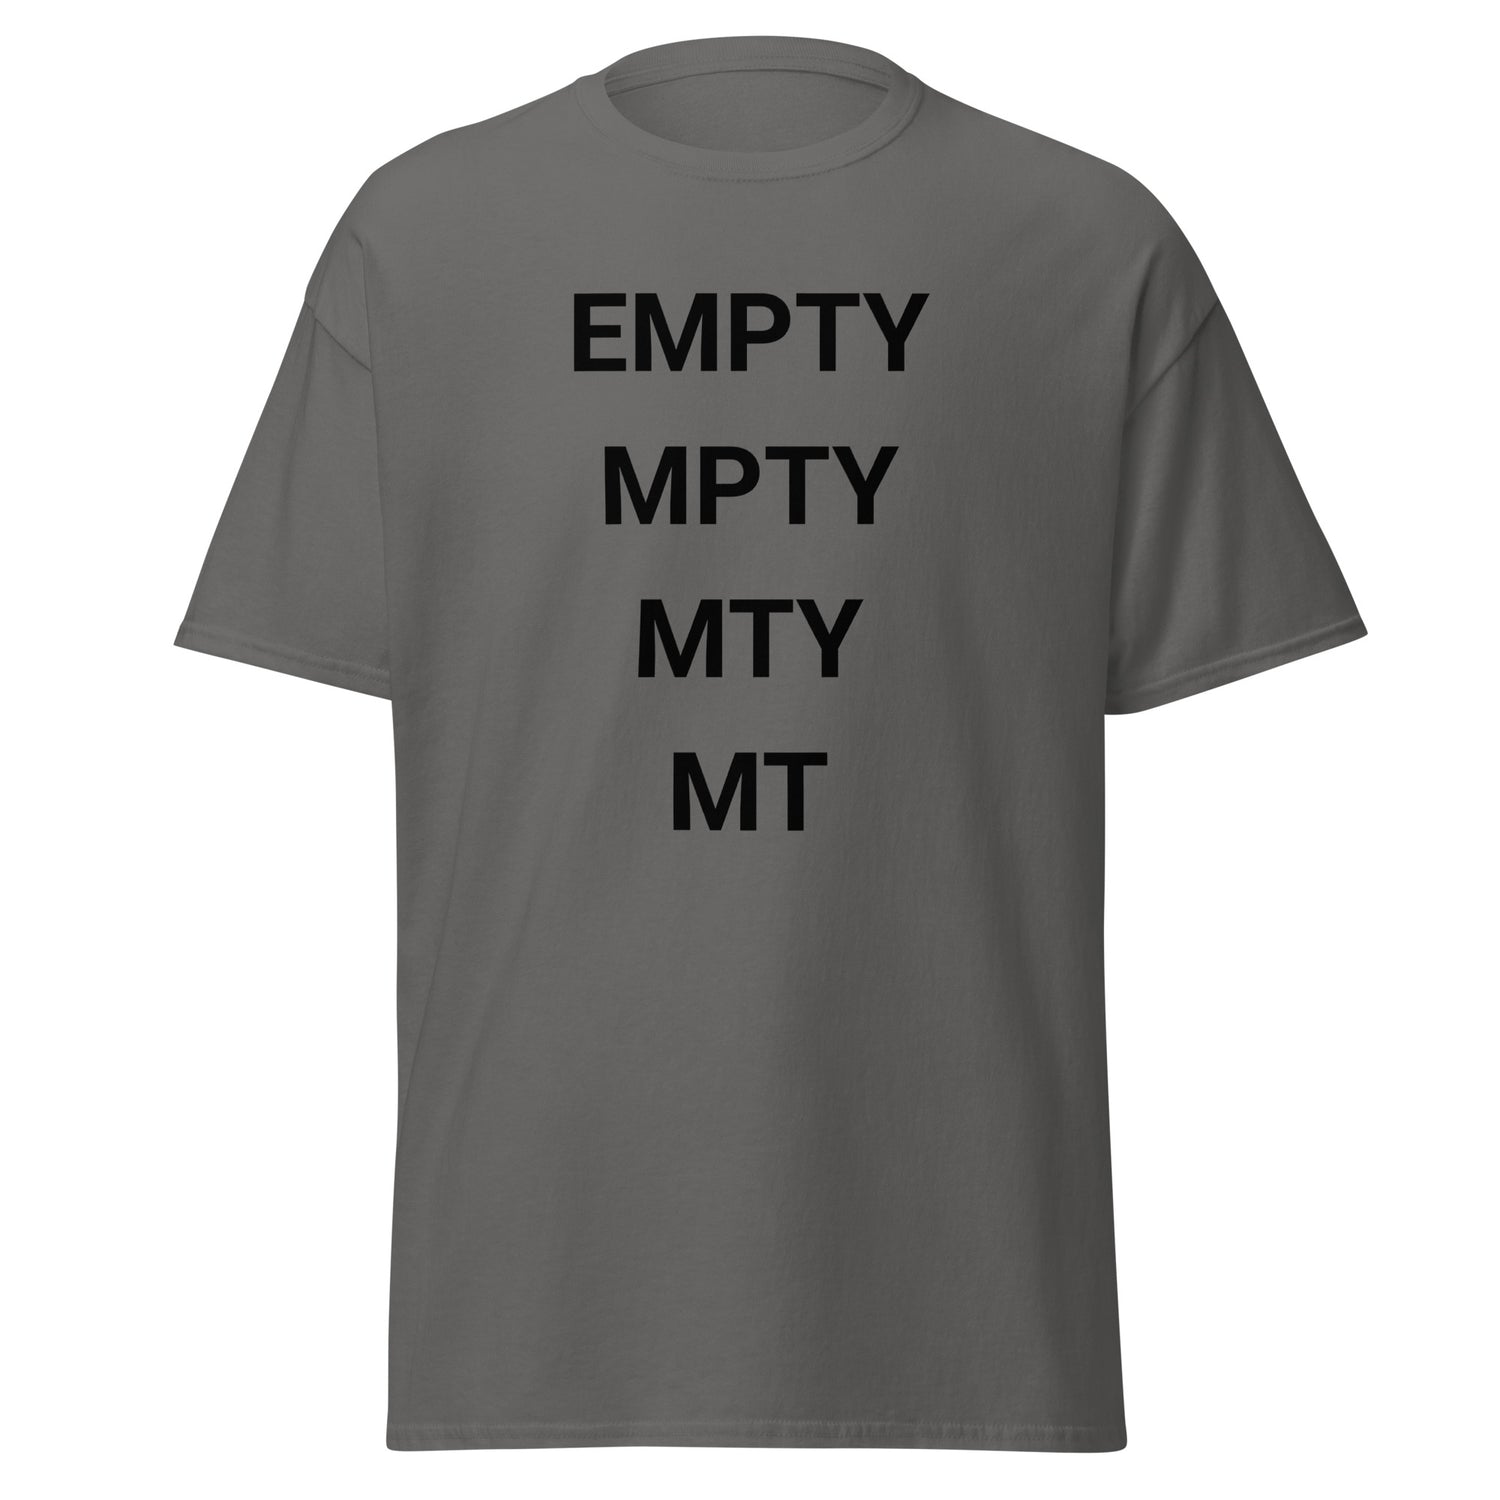 The Sound of Emptiness Tee